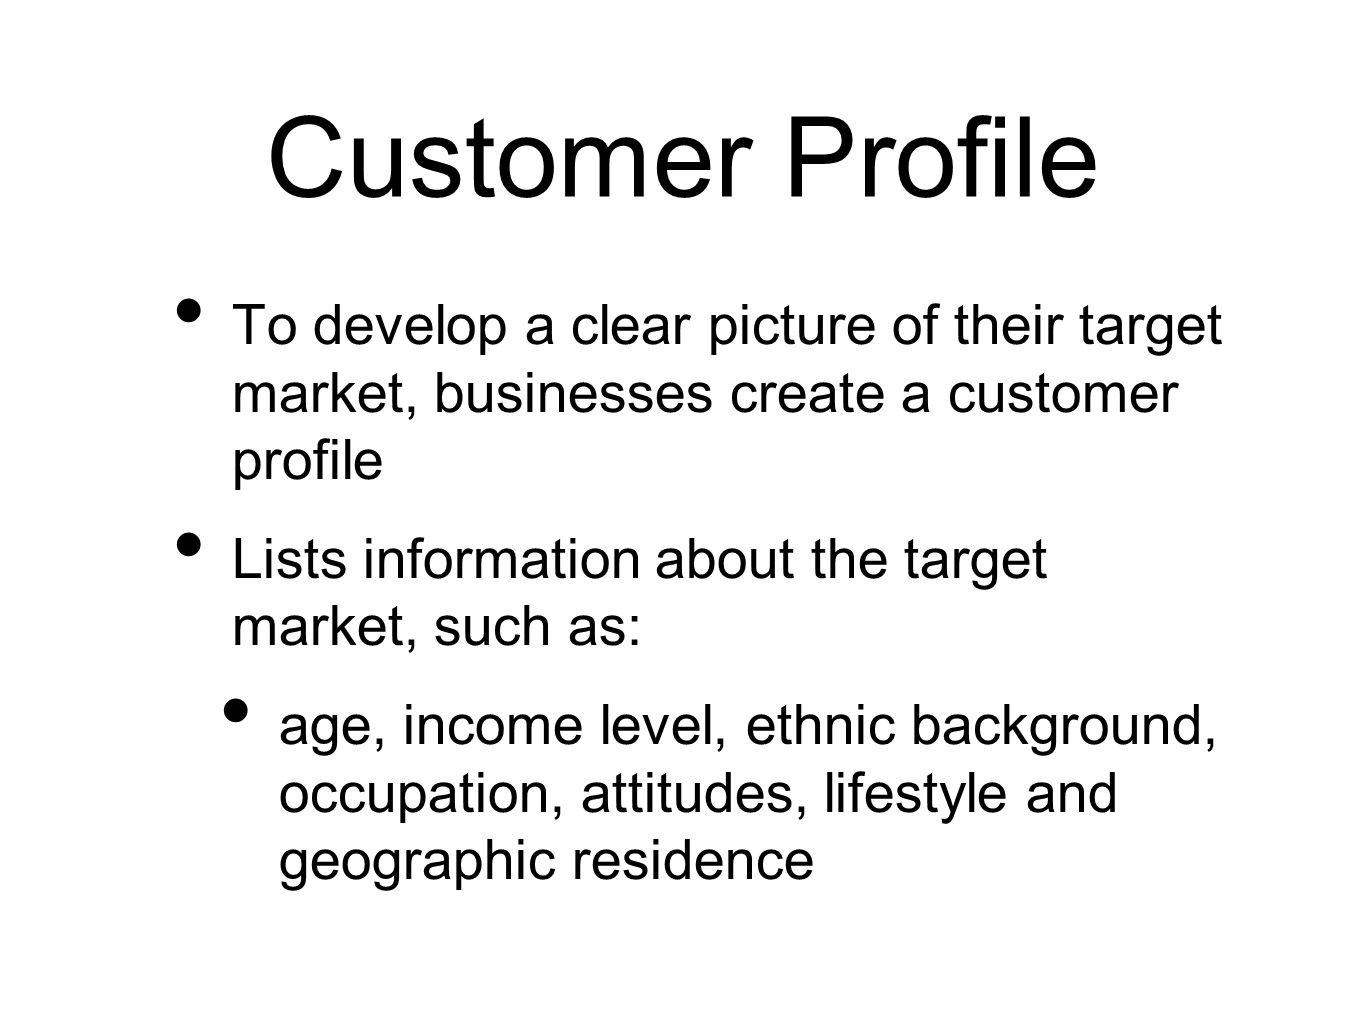 Customer Profile To develop a clear picture of their target market, businesses create a customer profile Lists information about the target market, such as: age, income level, ethnic background, occupation, attitudes, lifestyle and geographic residence